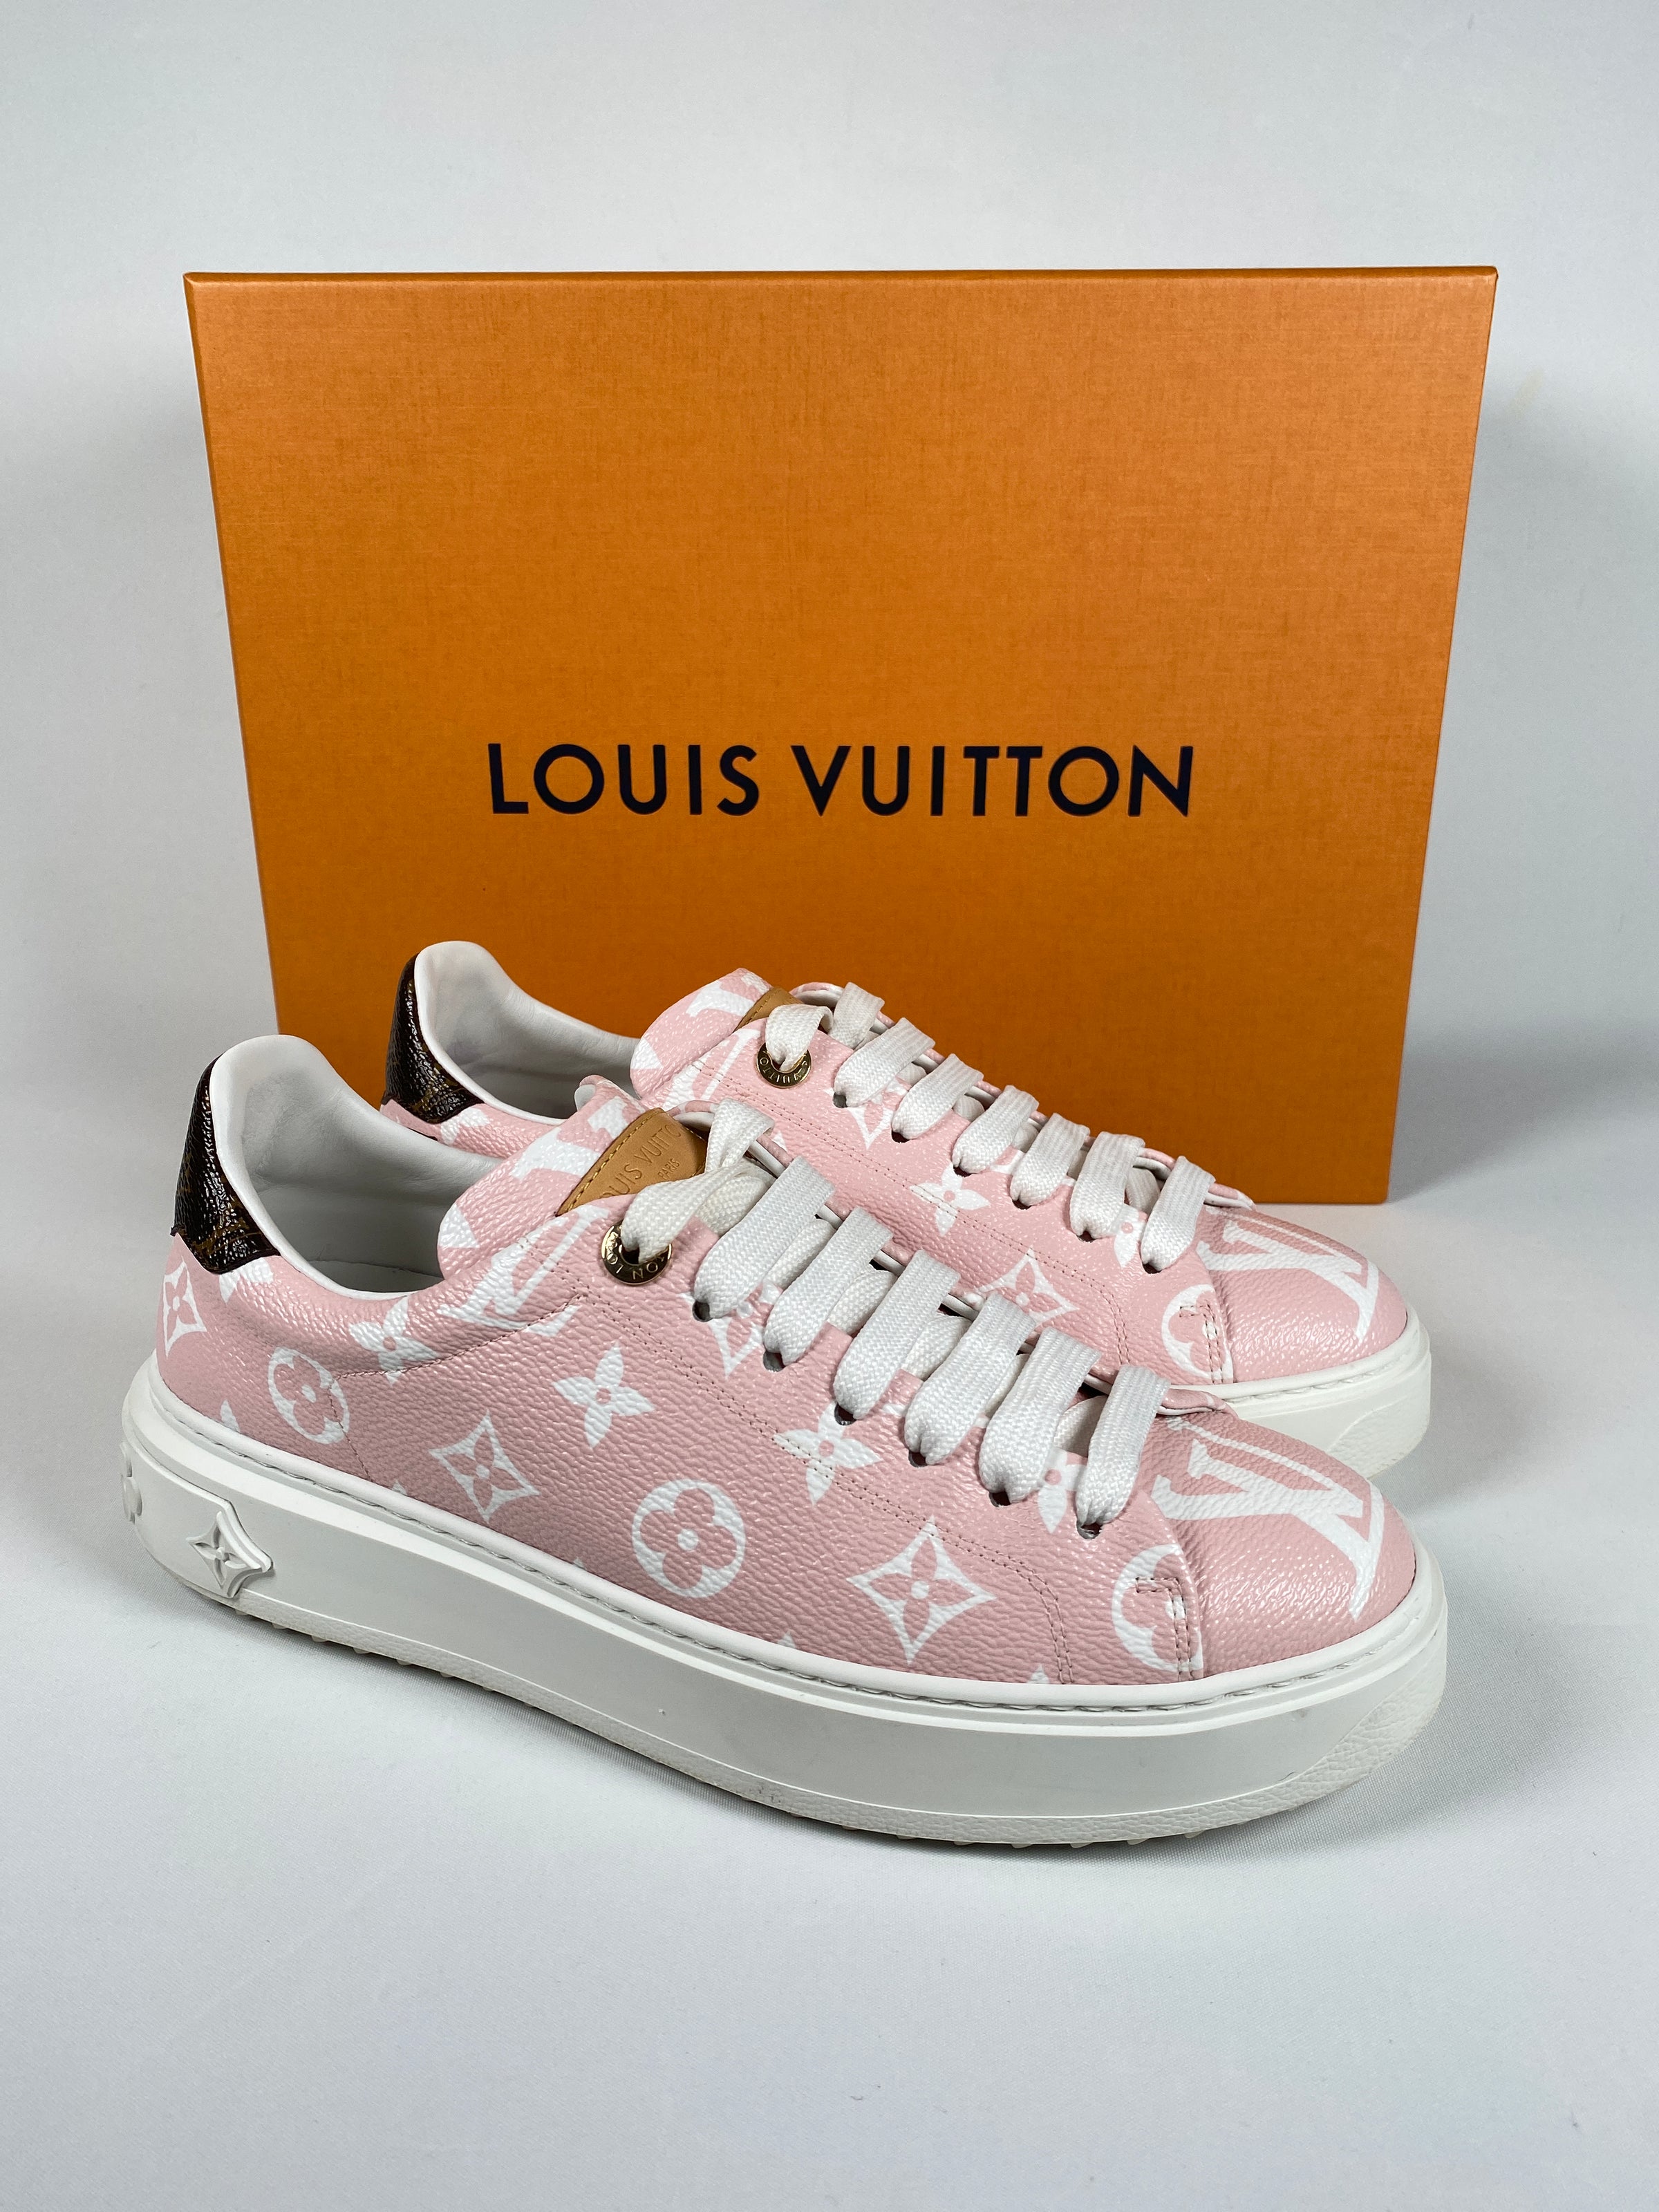 Limited Edition Louis Vuitton Sneakers Are Coming To Australia